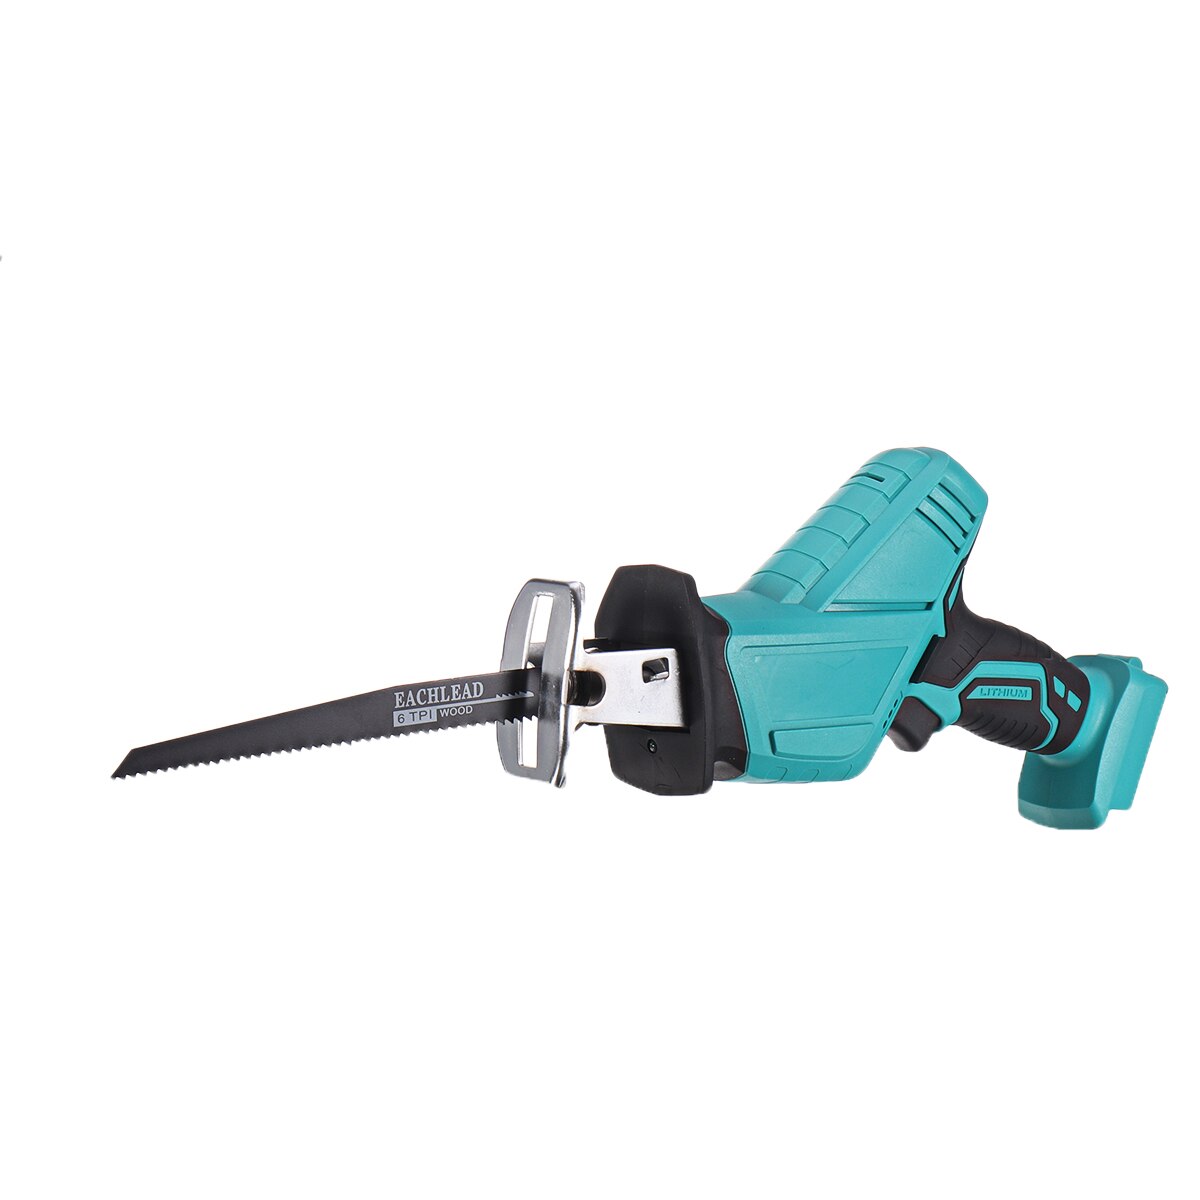 88V Cordless Electric Saw Reciprocating Saw Handsaw Saber Metal Cutting Wood Tool for Metal Wood Pipe Cutting Saw with 4 Blades: without battery